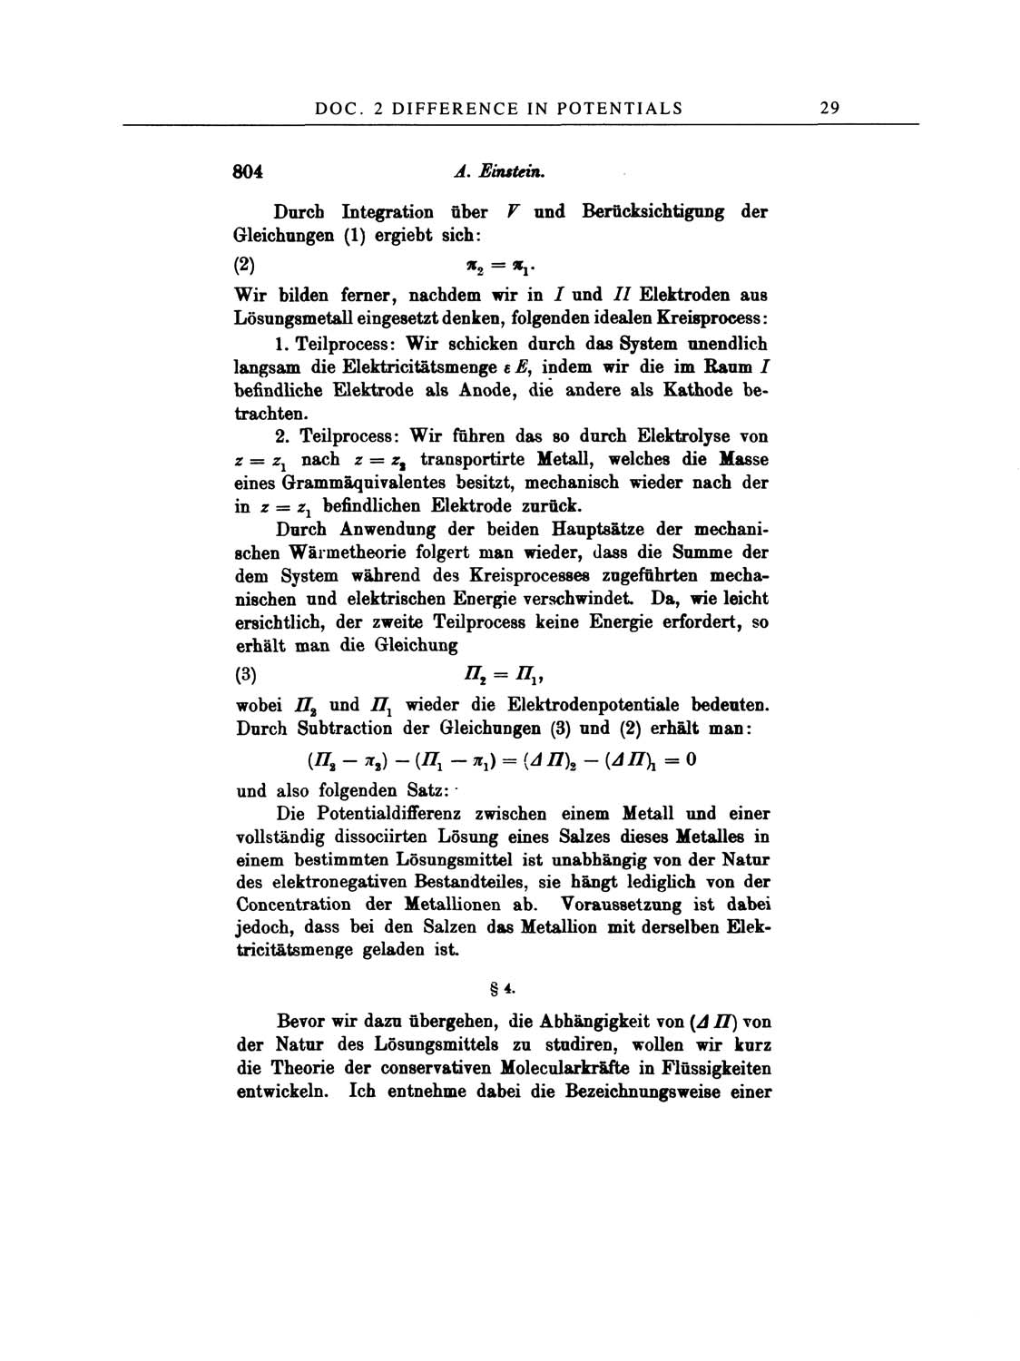 Volume 2: The Swiss Years: Writings, 1900-1909 page 29